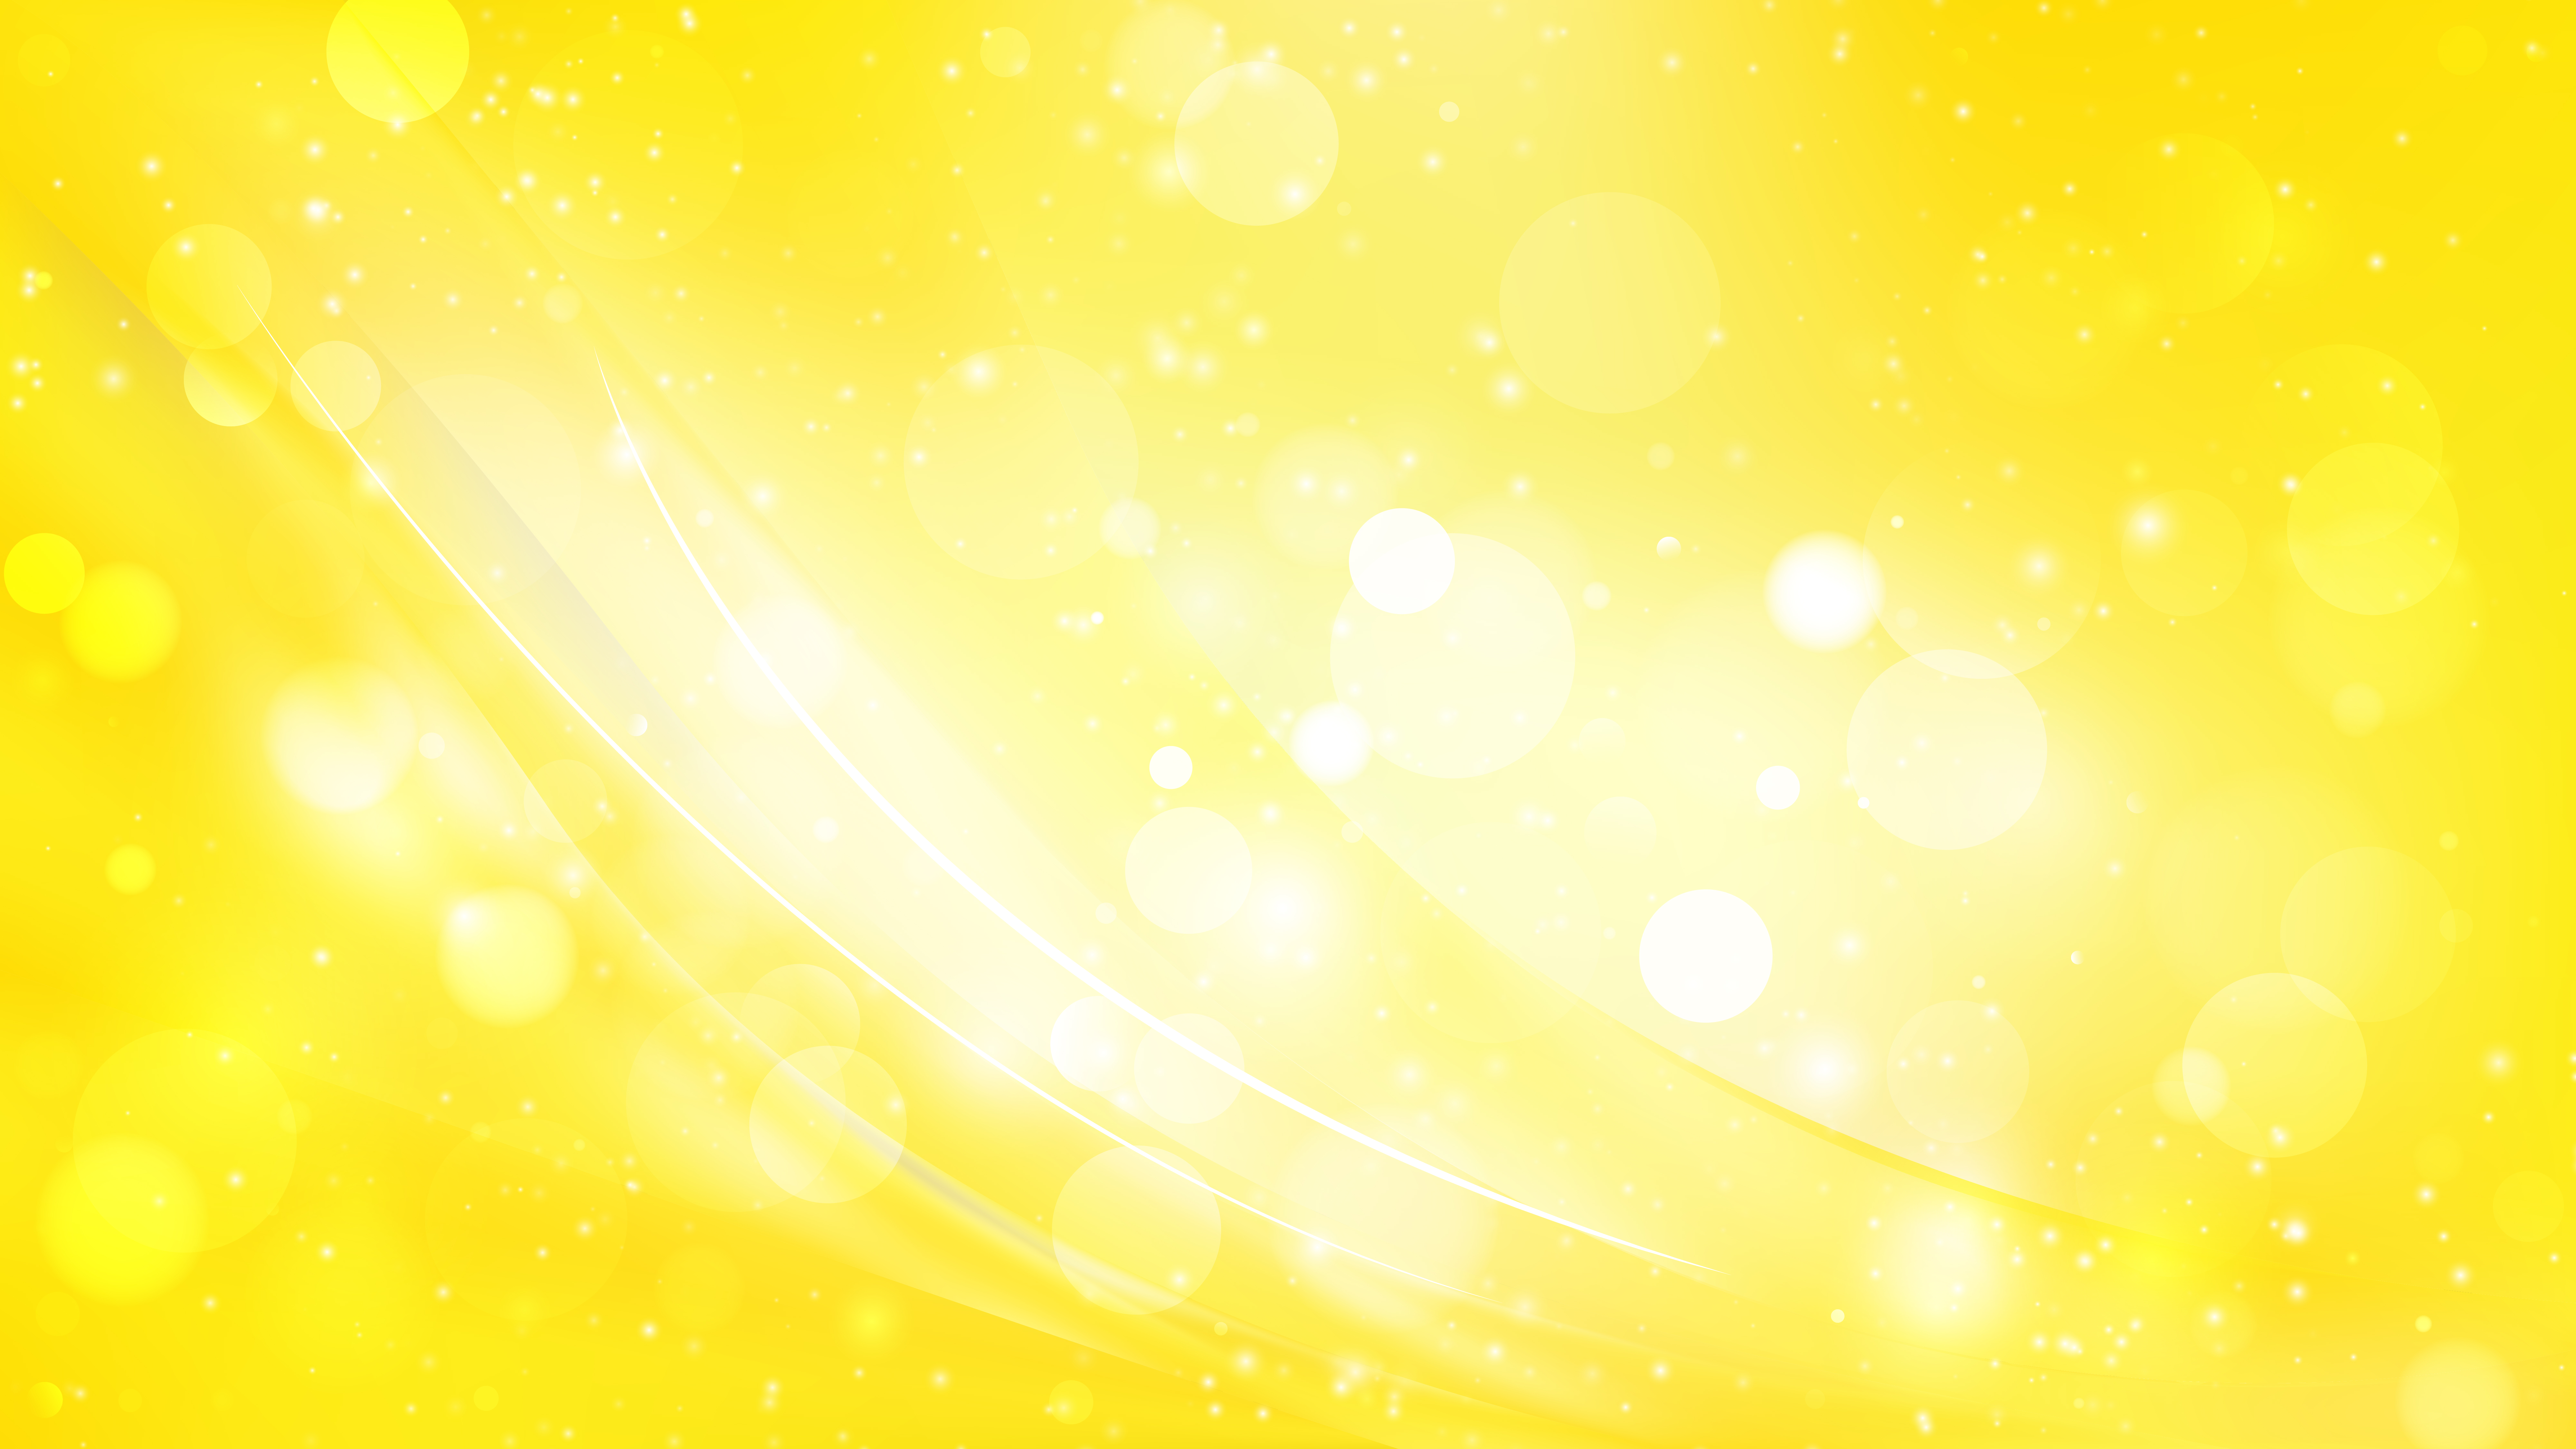 Abstract Bright Yellow Blurry Lights Background Vector